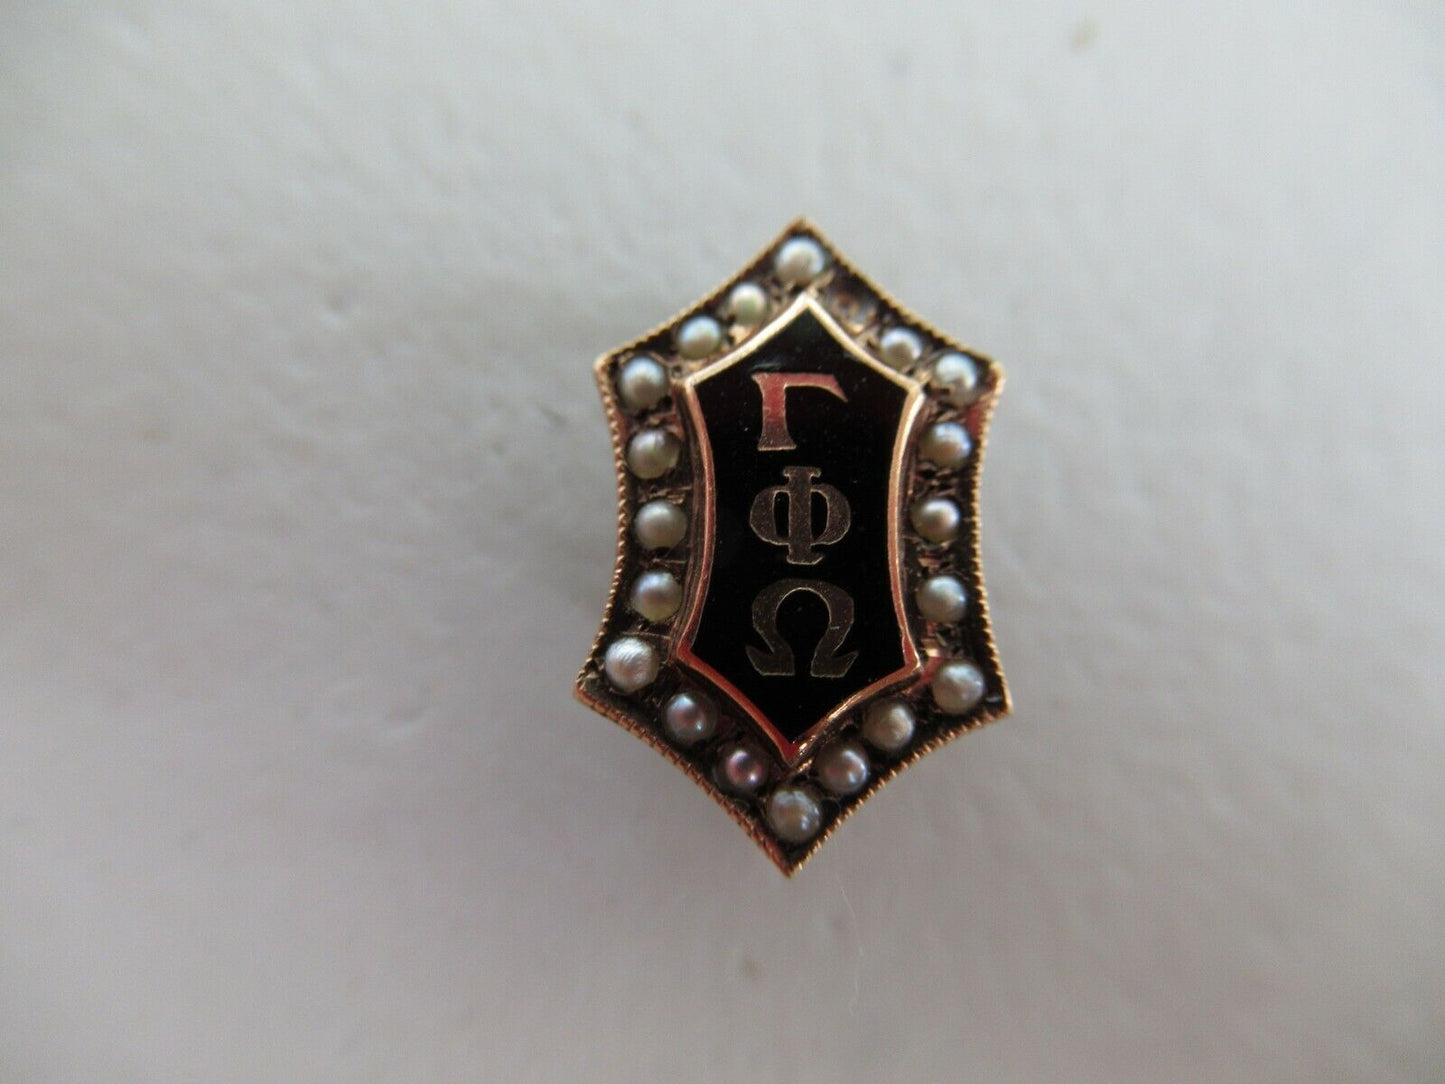 USA FRATERNITY PIN GAMMA PHI OMEGA. MADE IN GOLD. NAMED. MARKED. 769